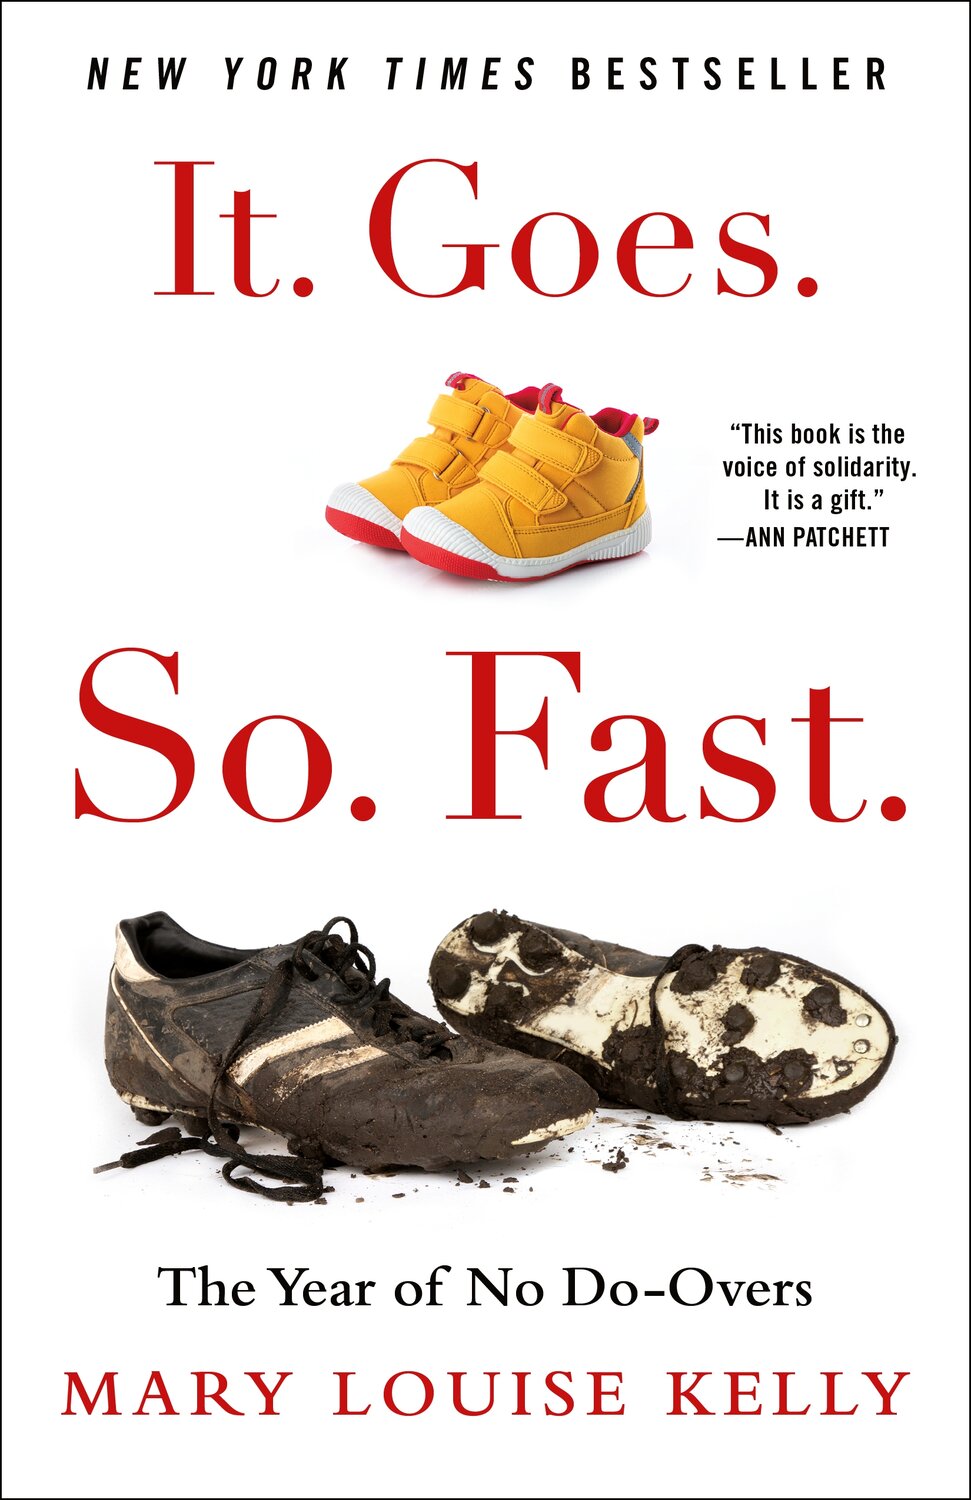 “It. Goes. So. Fast: The Year of No More Do-Overs” by Mary Louise Kelly